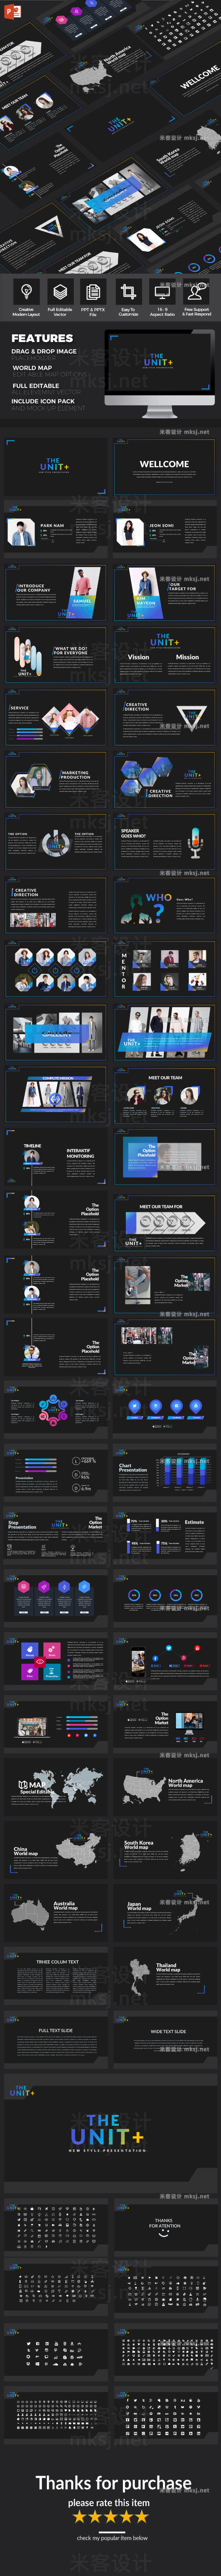 PPT模板 the unit multipurpose powerpoint template